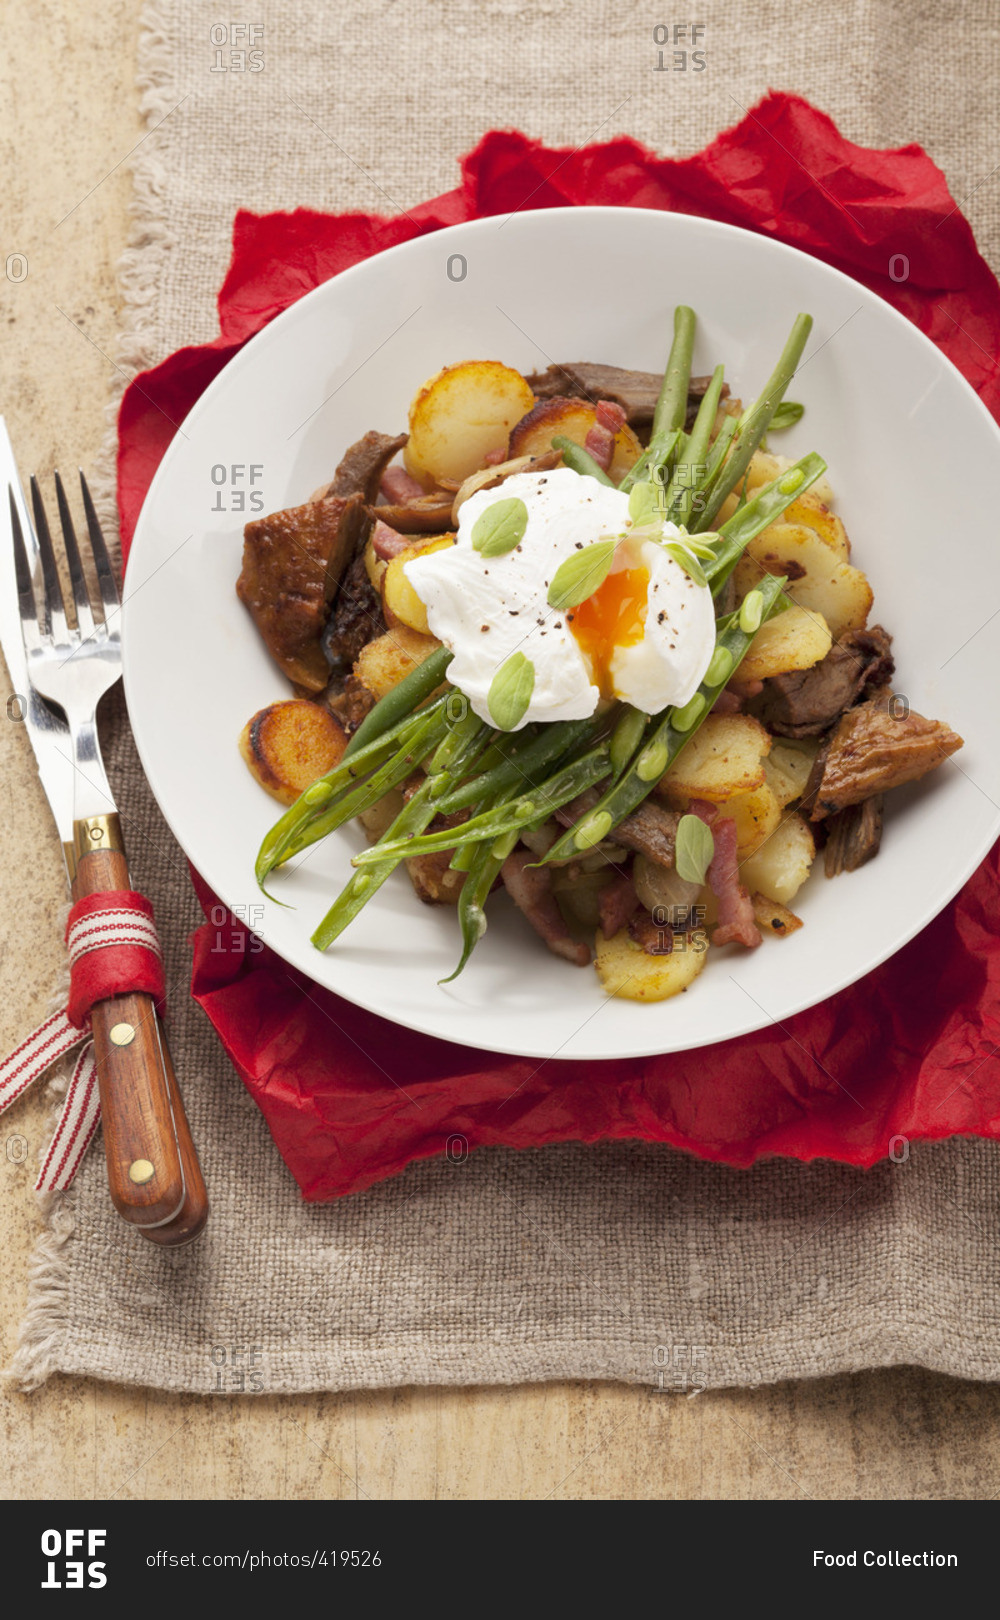 (typical Tirolean dish using leftovers) with potatoes, pork, green beans and a poached egg